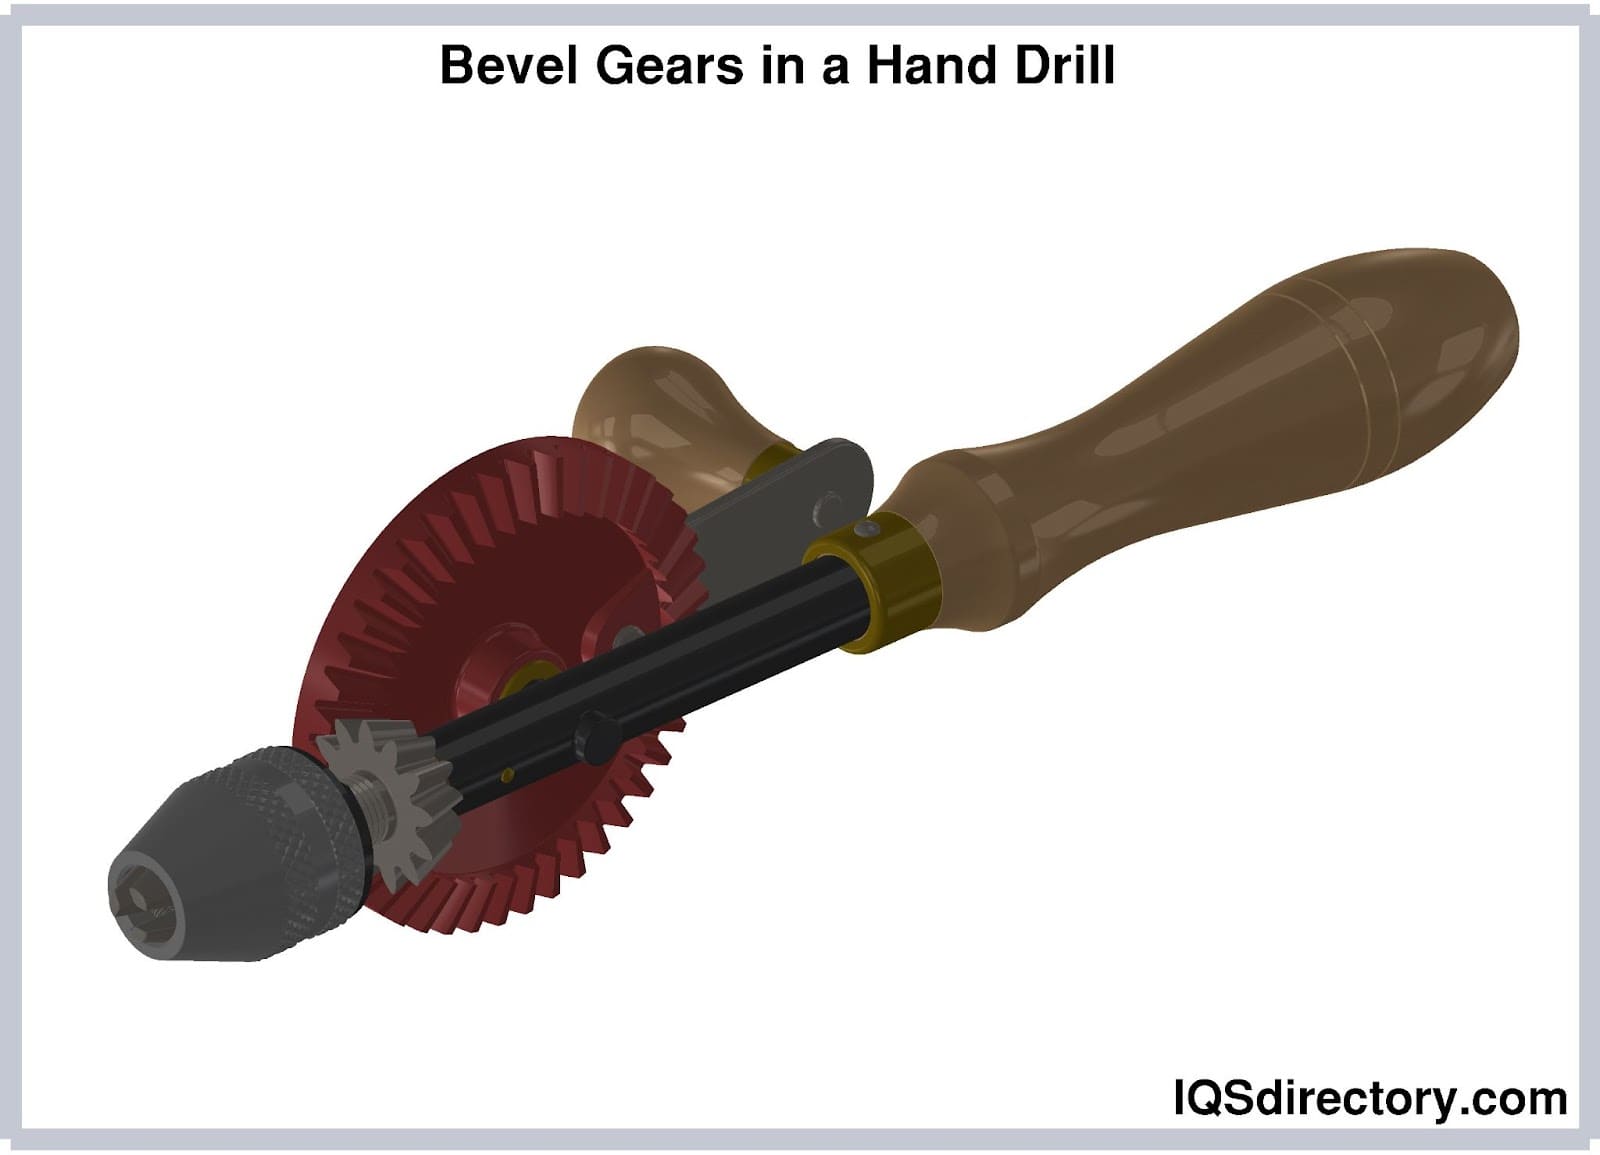 Bevel Gears in a Hand Drill